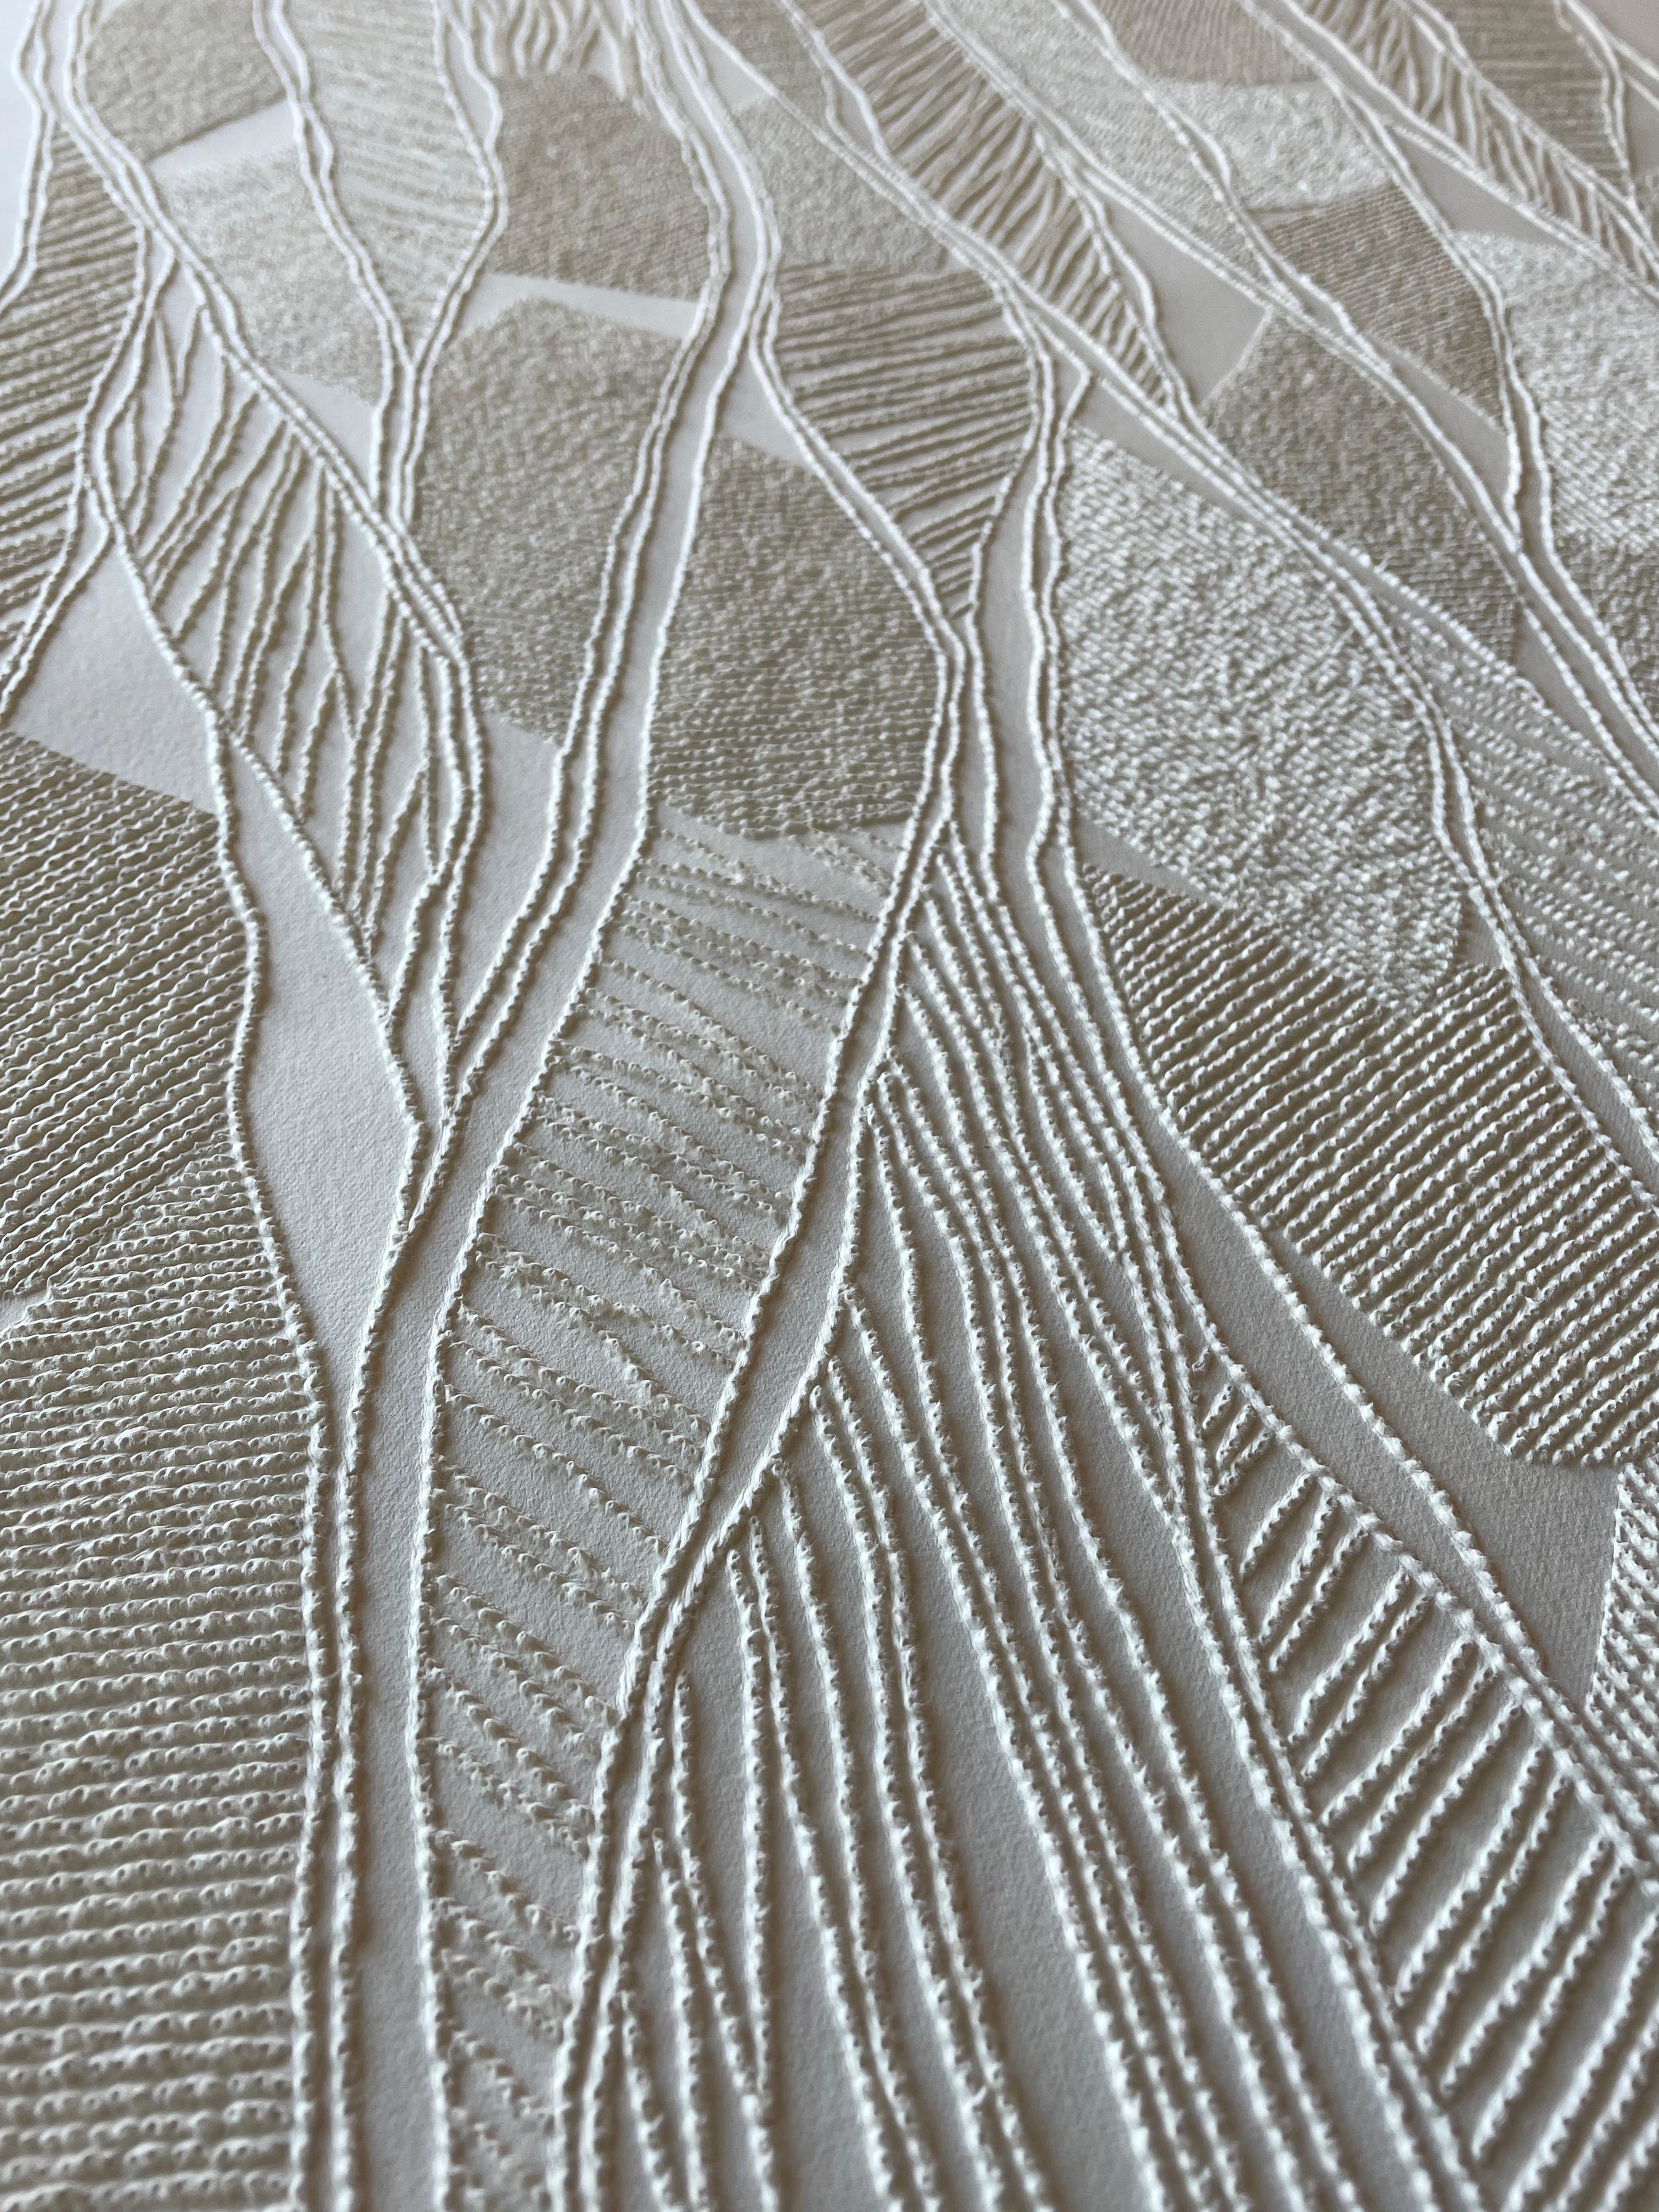 #2- intricate beige 3D abstract aerial landscape drawing with pulled paper fiber - Sculpture by Antonin Anzil